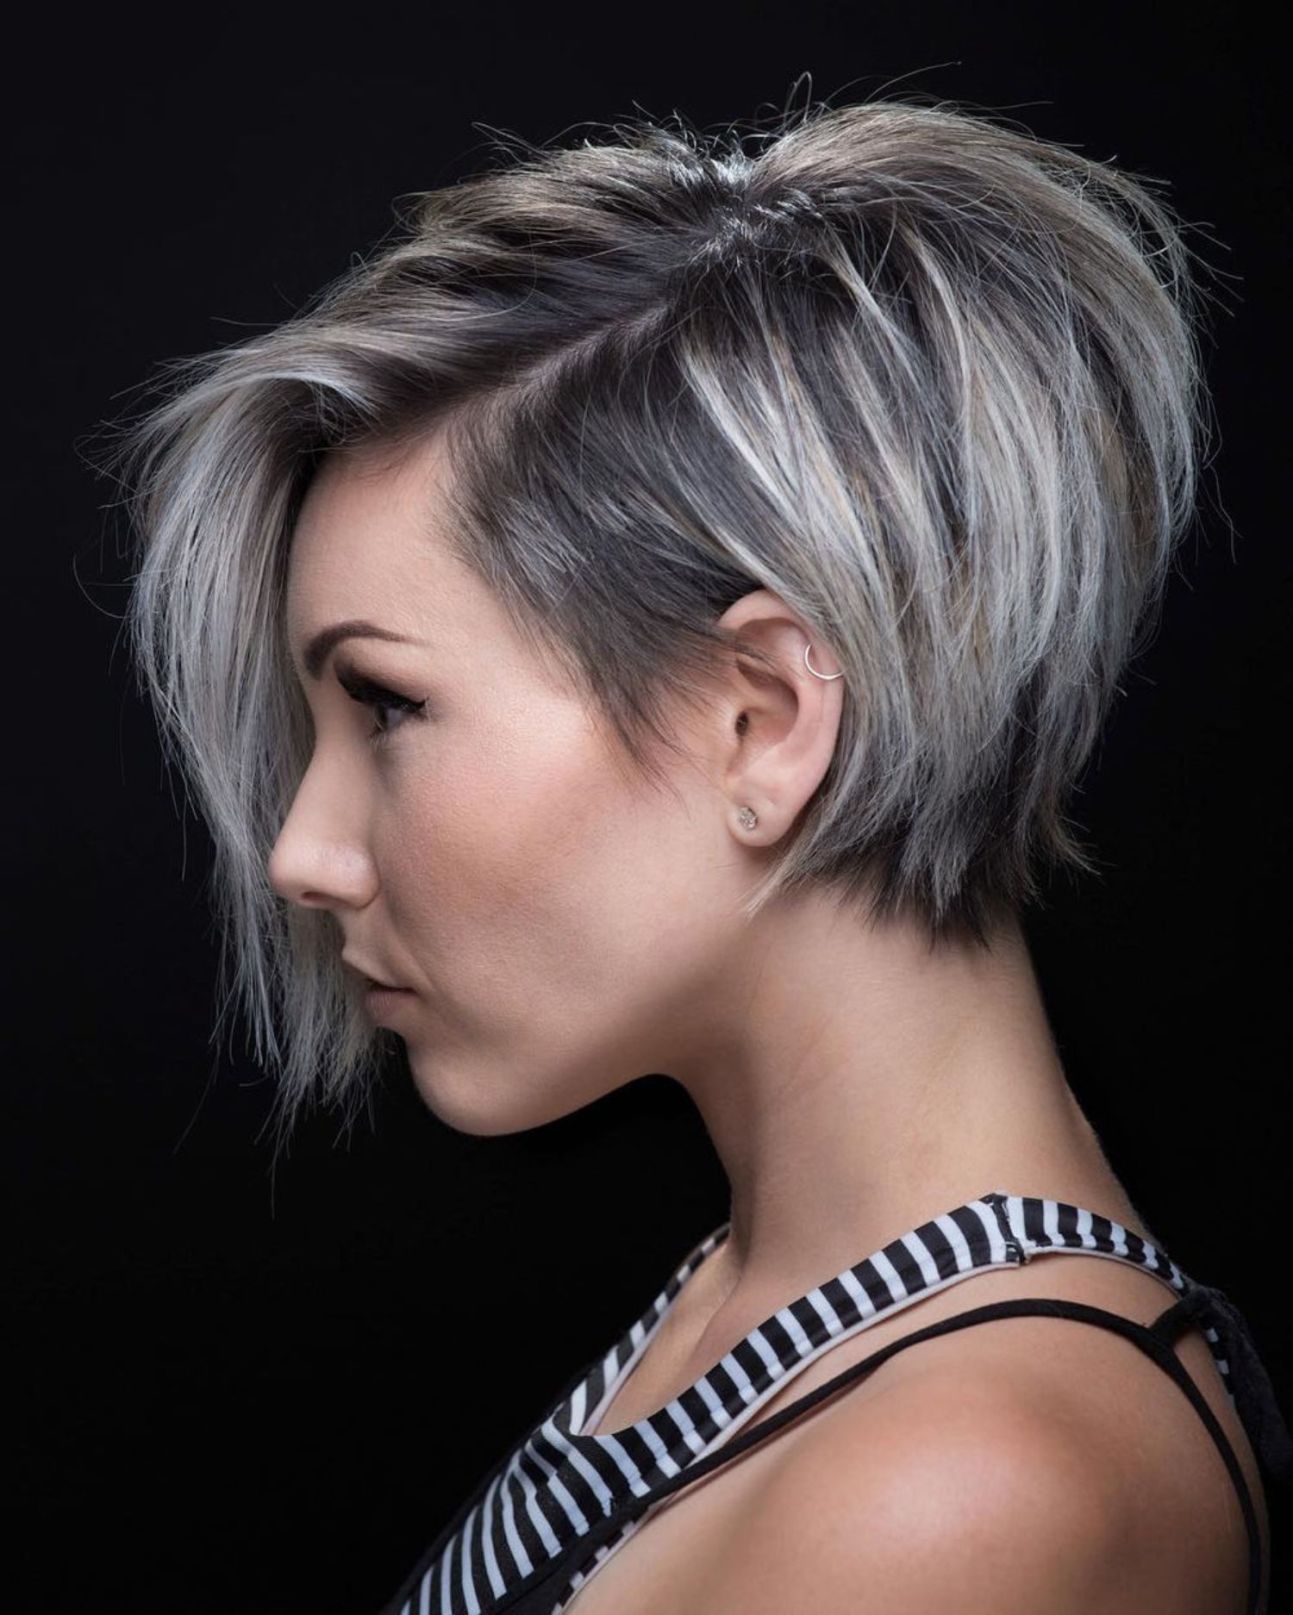 70 Short Shaggy, Spiky, Edgy Pixie Cuts and Hairstyles -   16 edgy hairstyles Short ideas